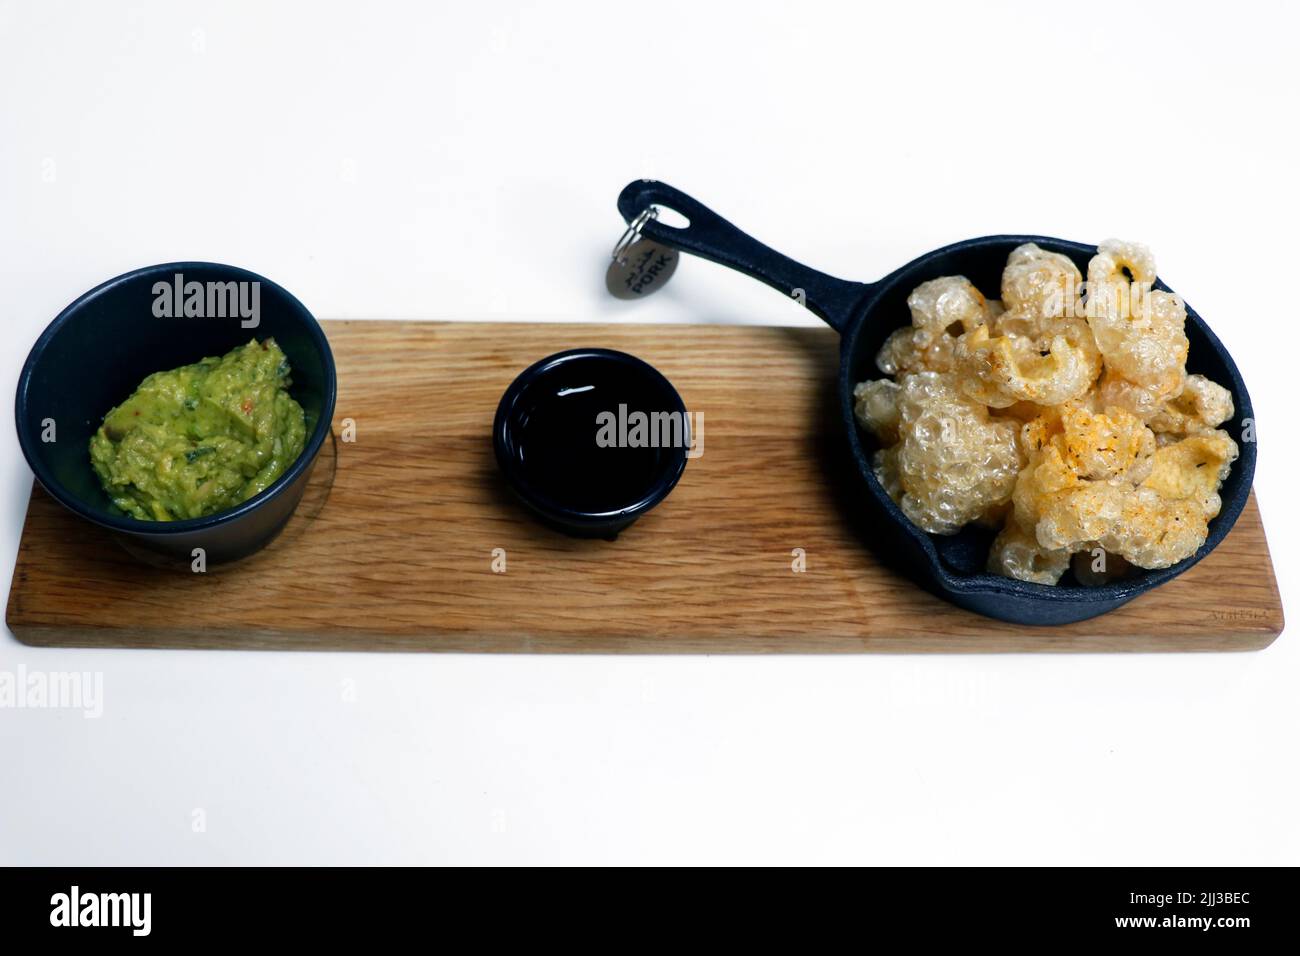 deep fried crispy pork skin known as chicharon with soya sauce and avocado guacamole, filipino delicacy food, served a plate with pork tag to identify Stock Photo